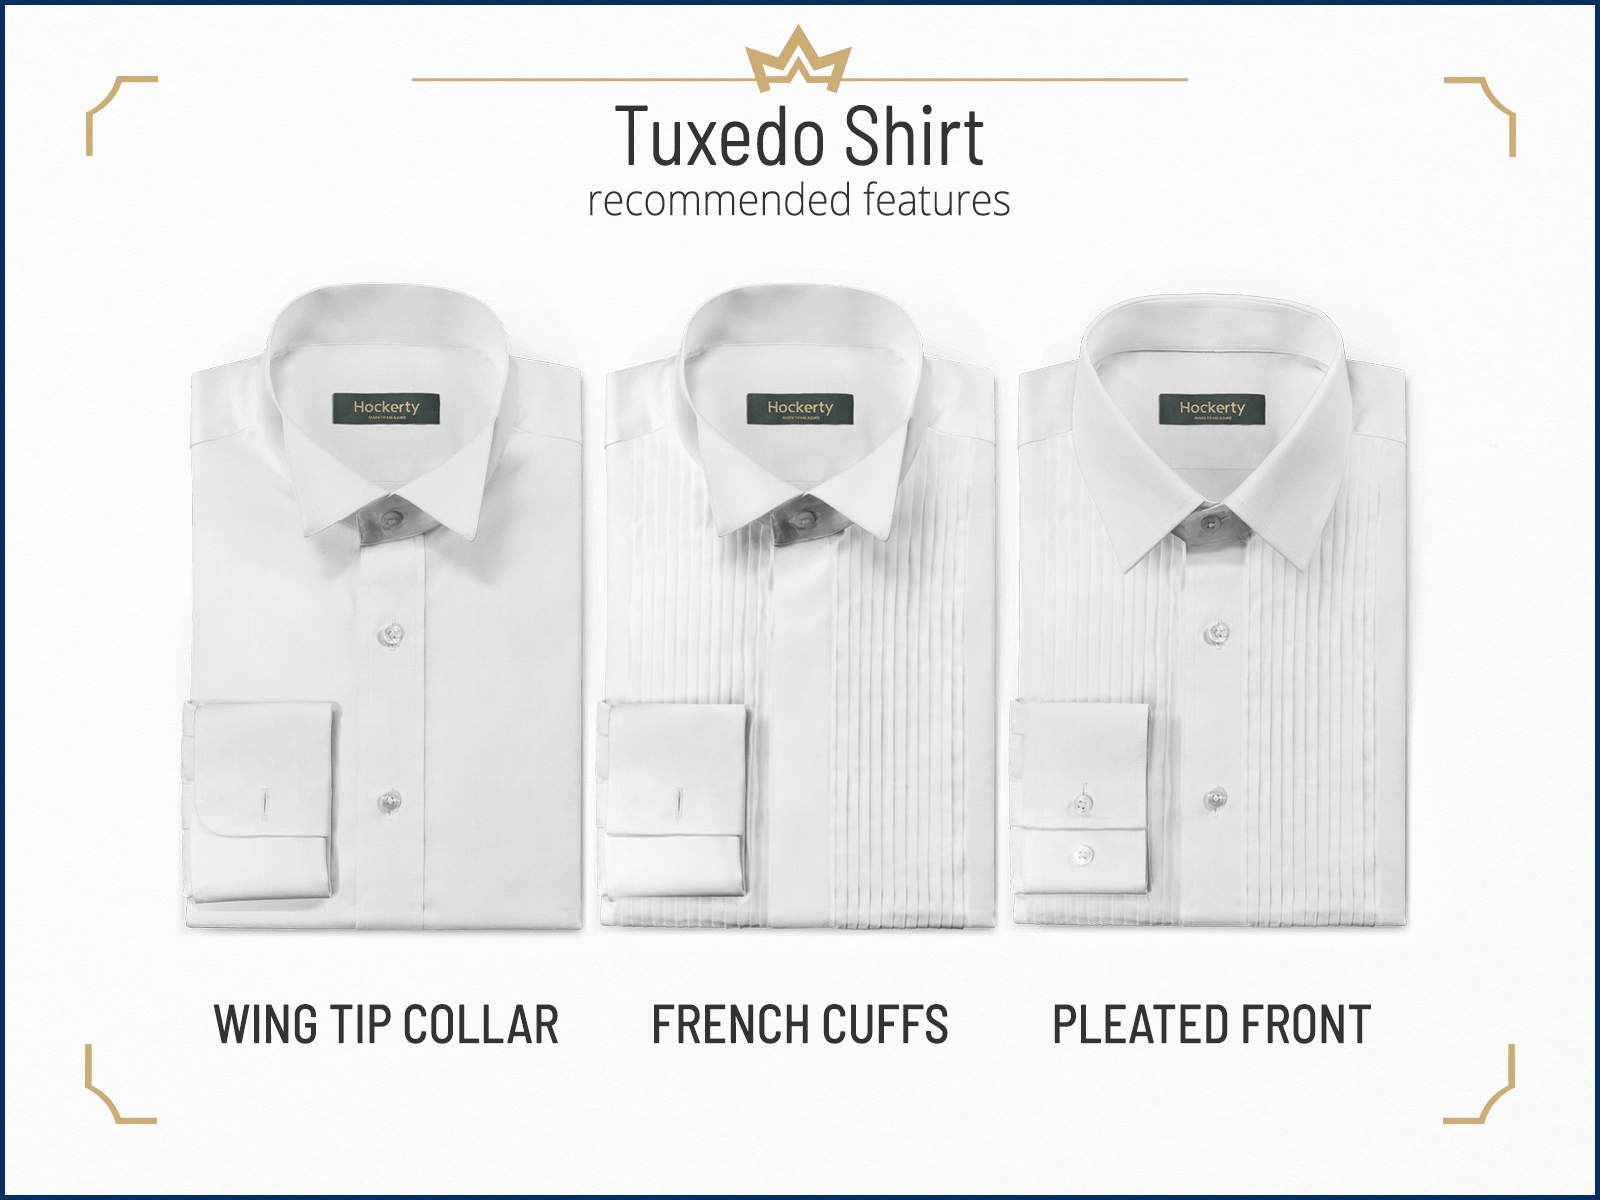 The features of a white tuxedo shirt, recommended for black-tie